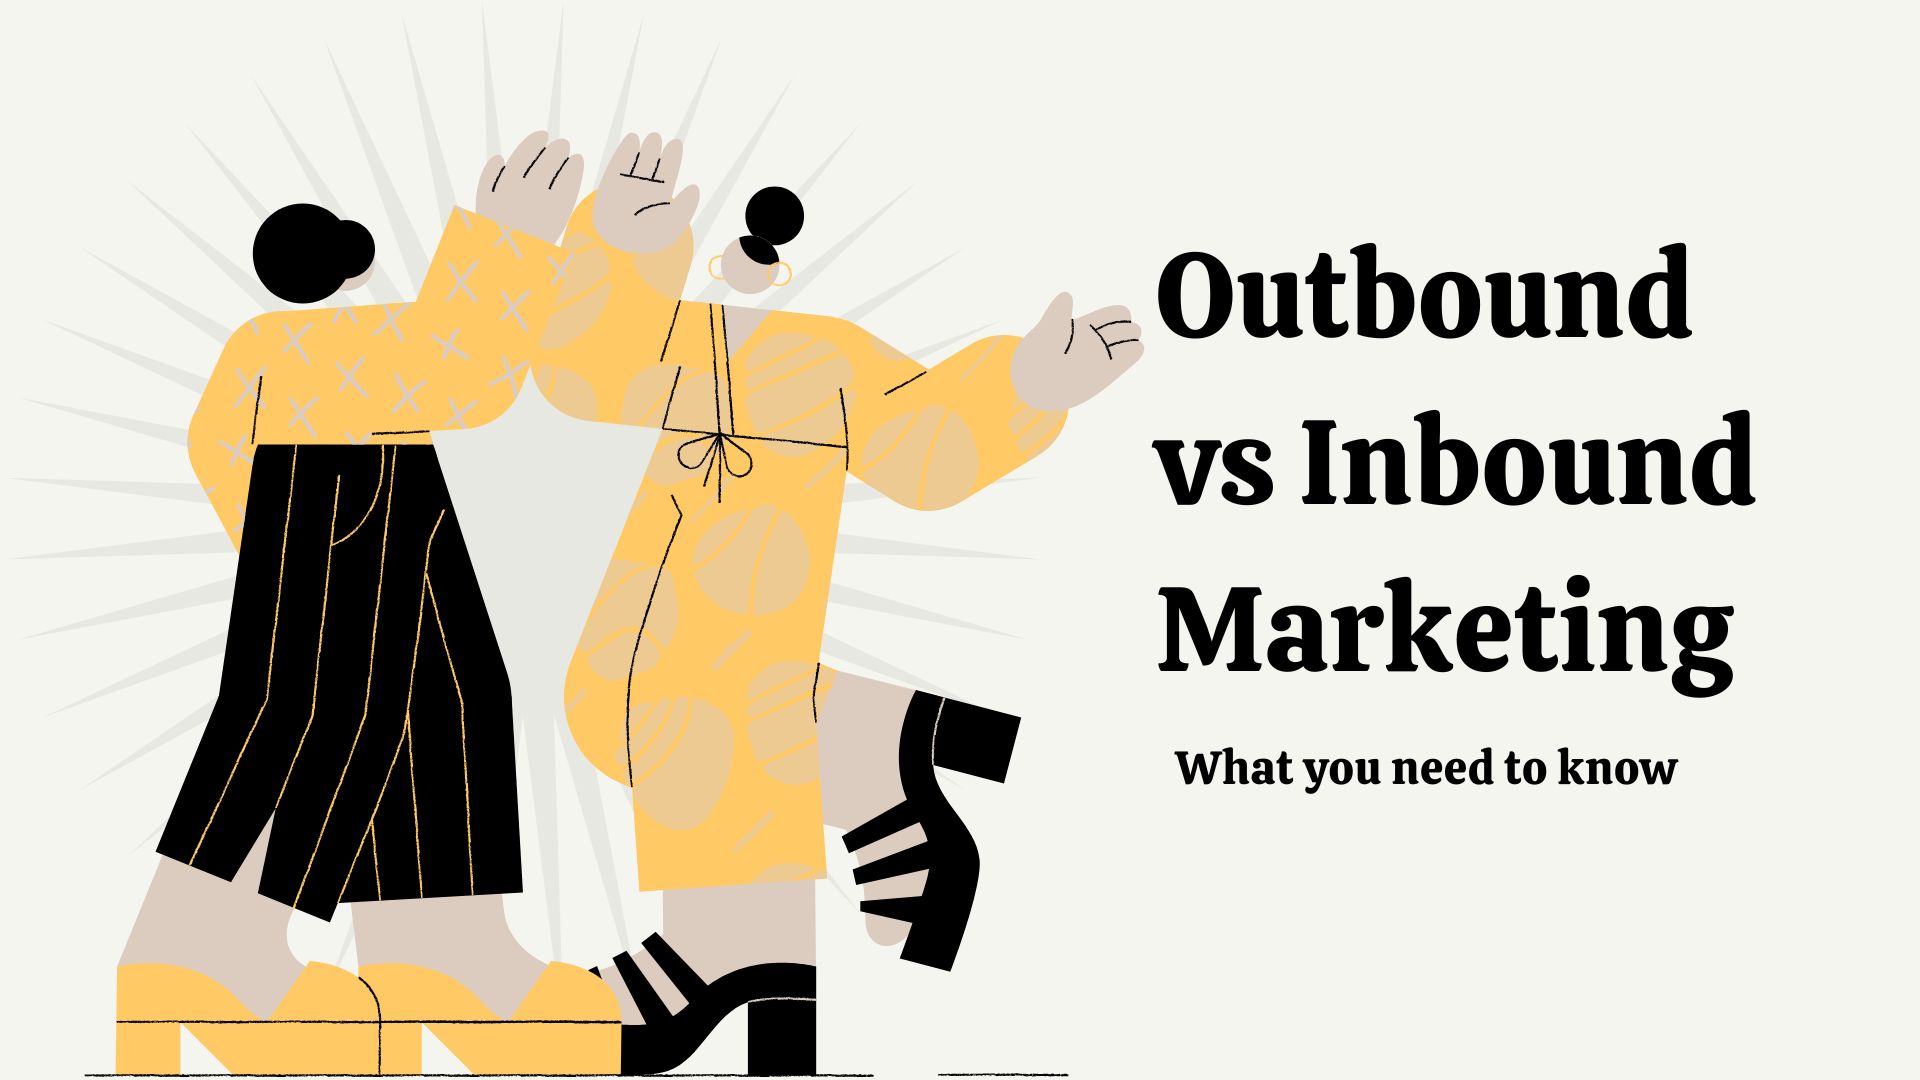 Outbound vs Inbound Marketing - What you need to know